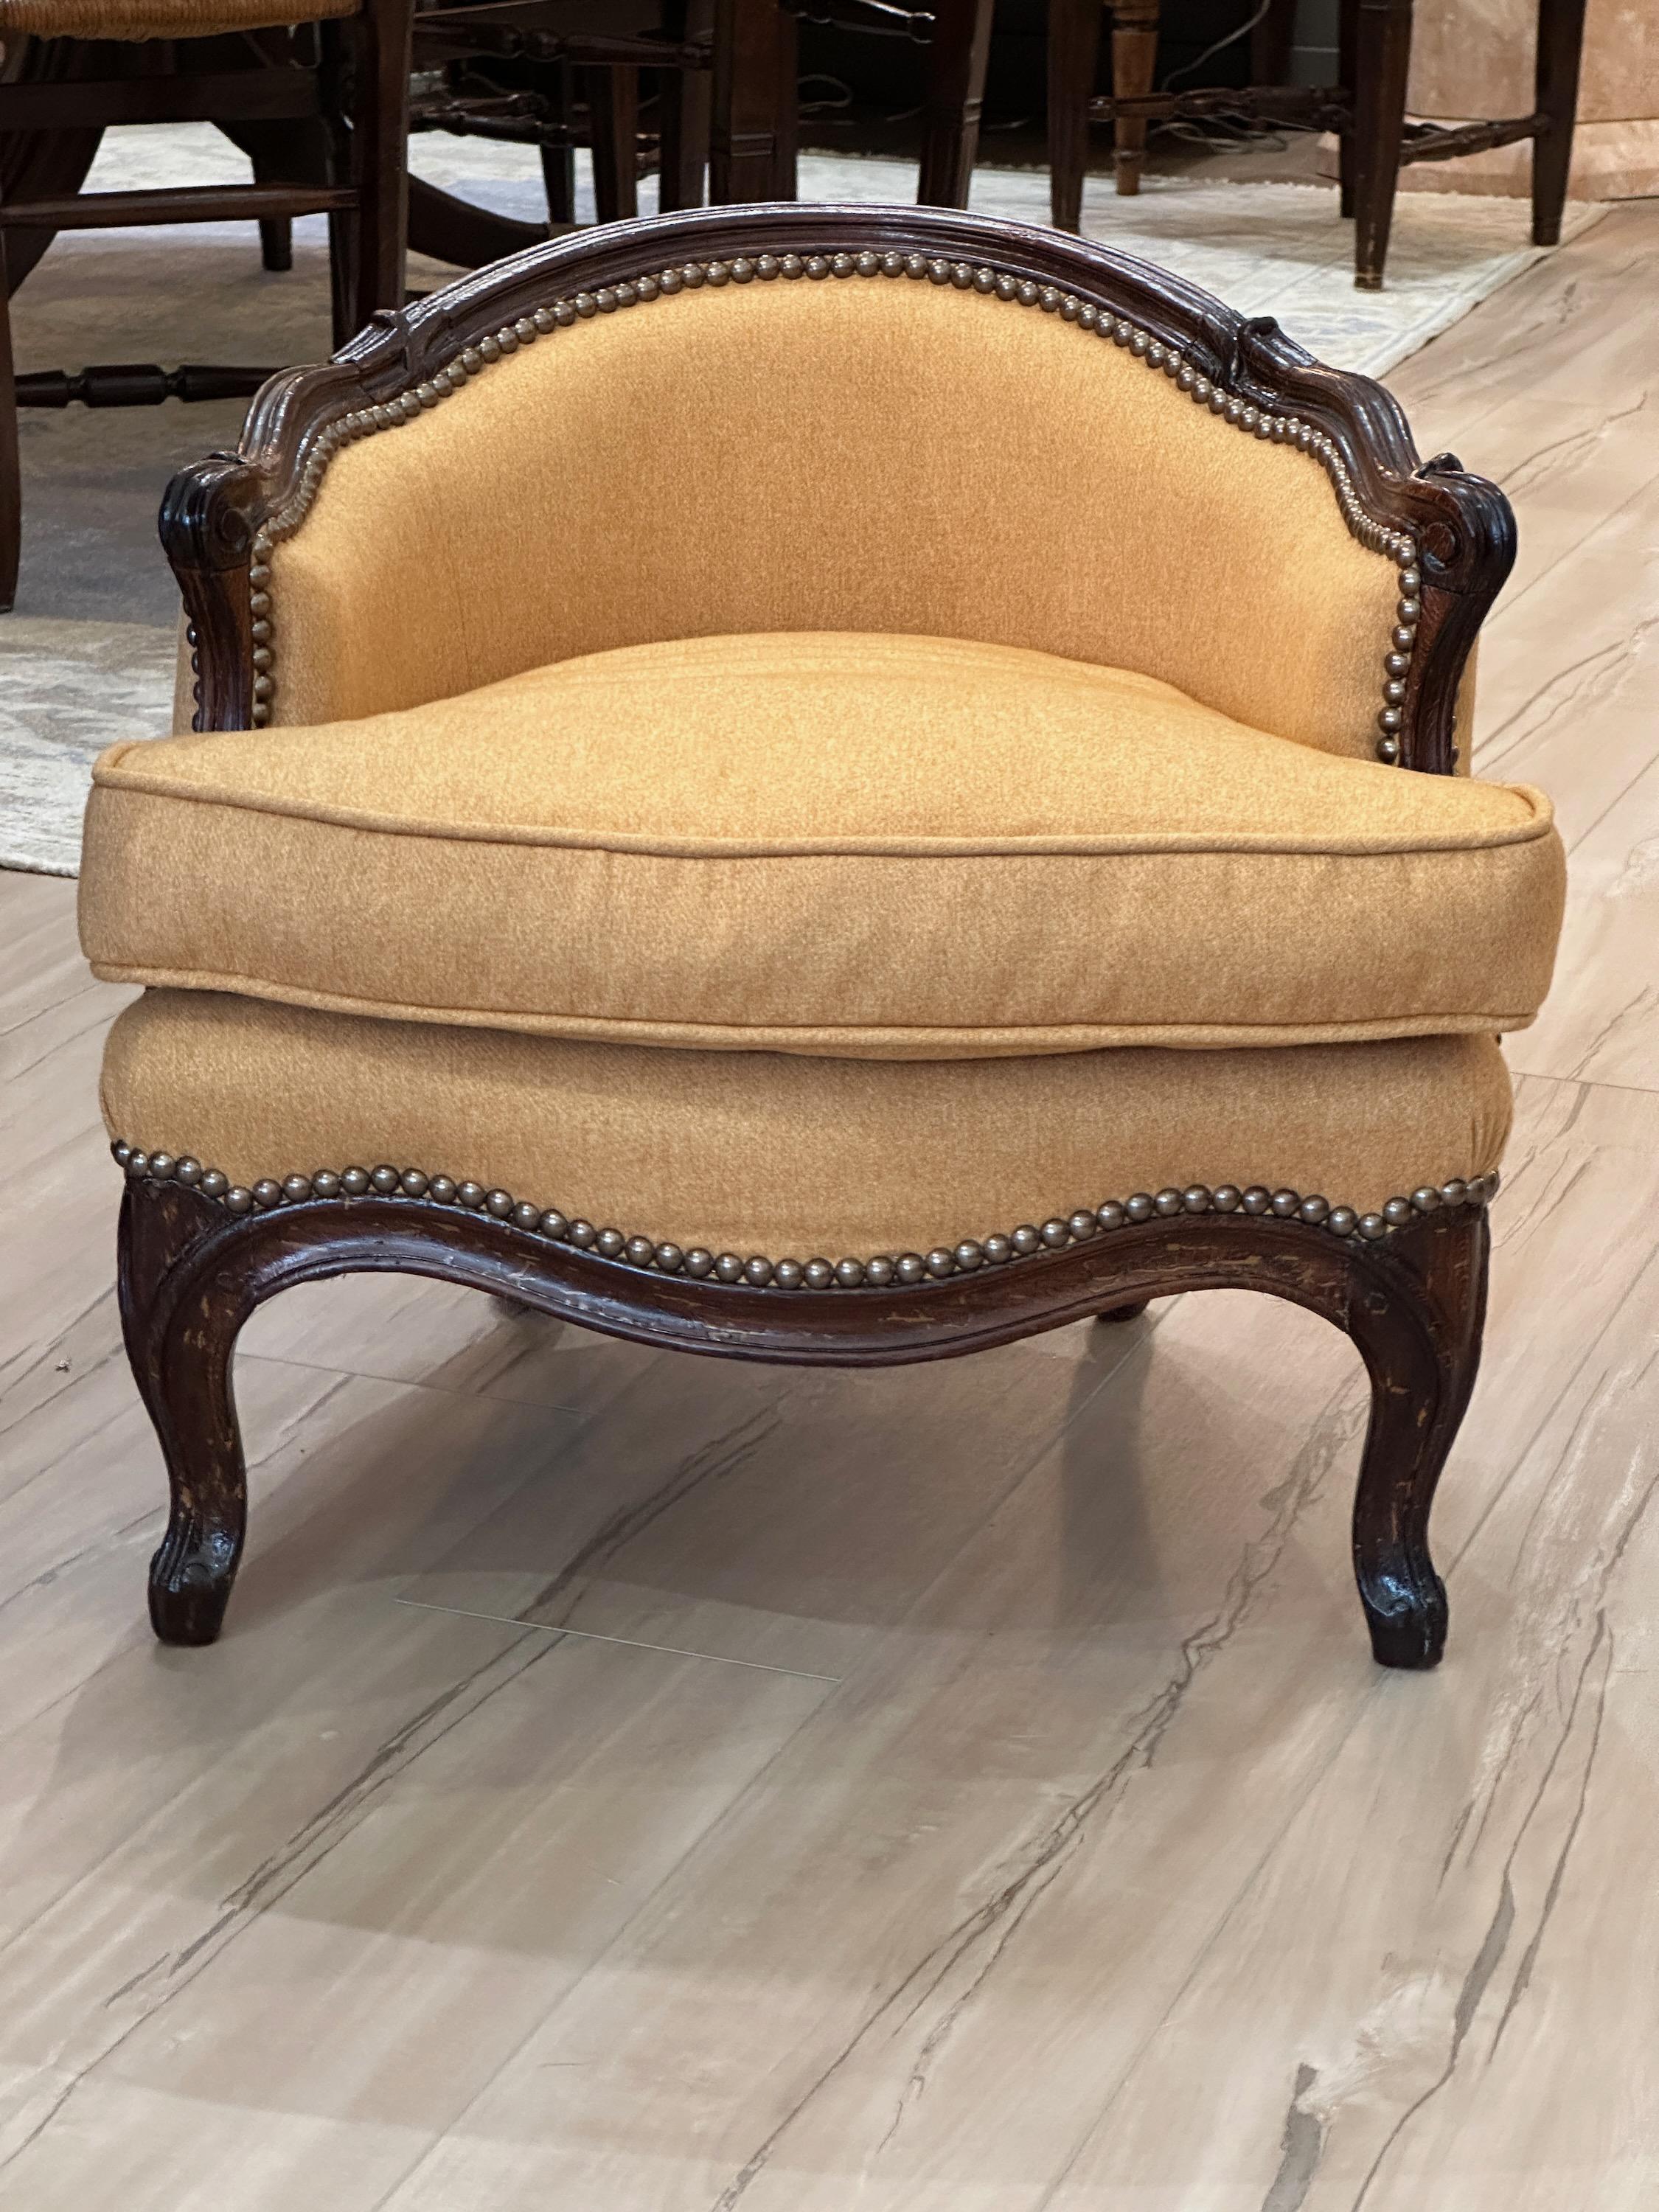 A charming late 18th century. French chauffeuse, or fireside chair, in the Louis XVI style with carved mahogany frame and upholstered in a light apricot colored wool.